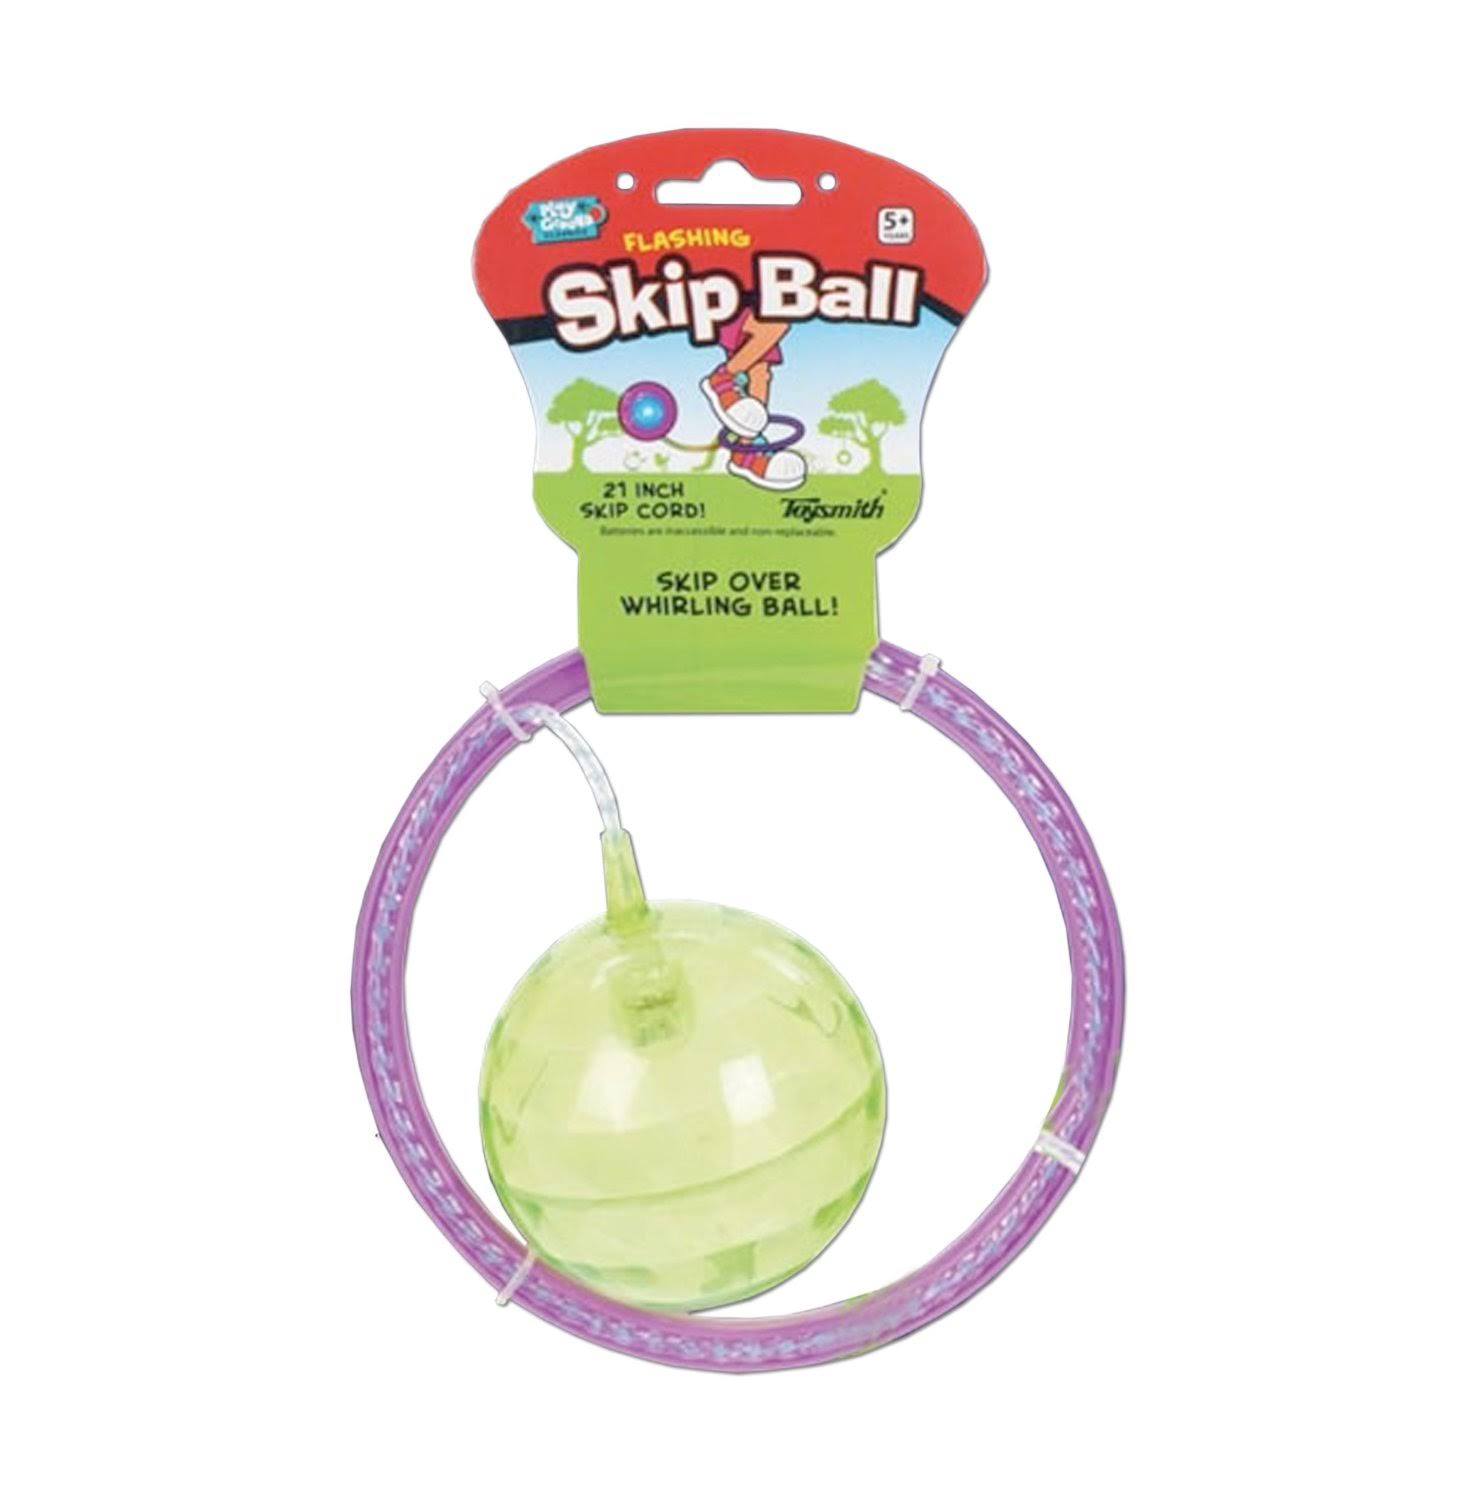 Toysmith 21 Inch Light Up Skip Ball (Colors May Vary) Multi-Colored